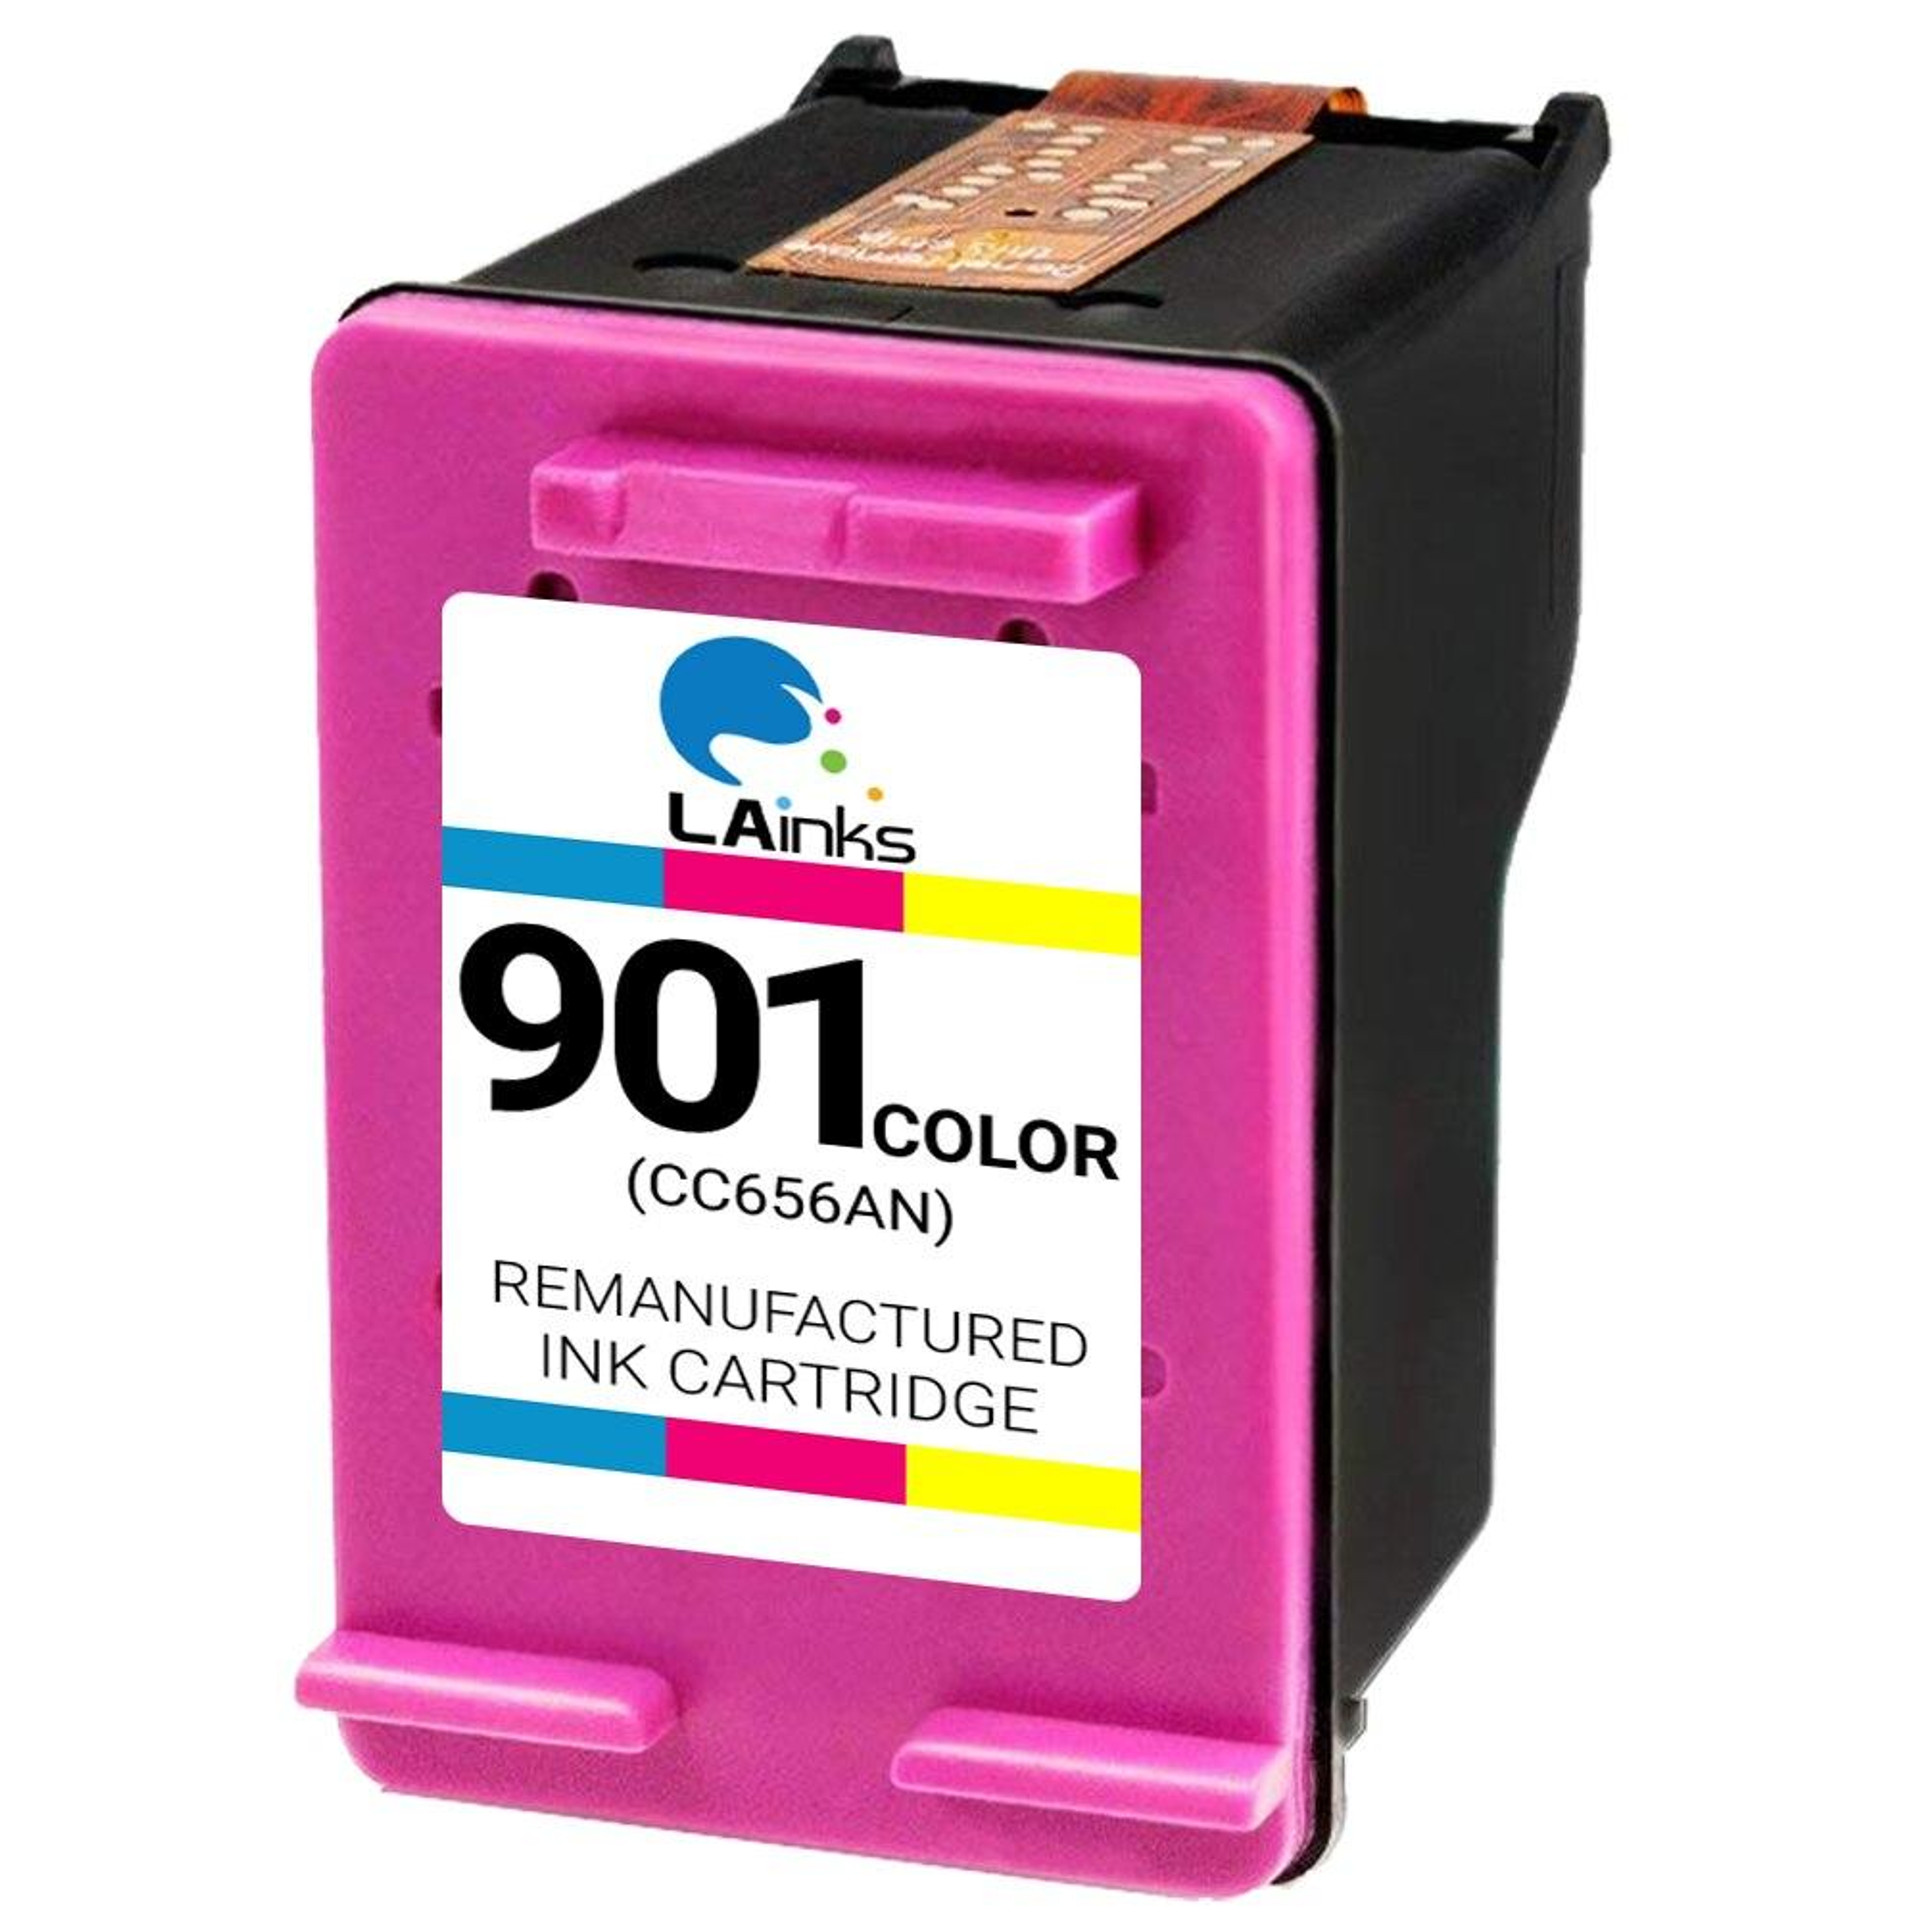 Remanufactured Ink Cartridge For Hp 901 Cc656an Color By 2321